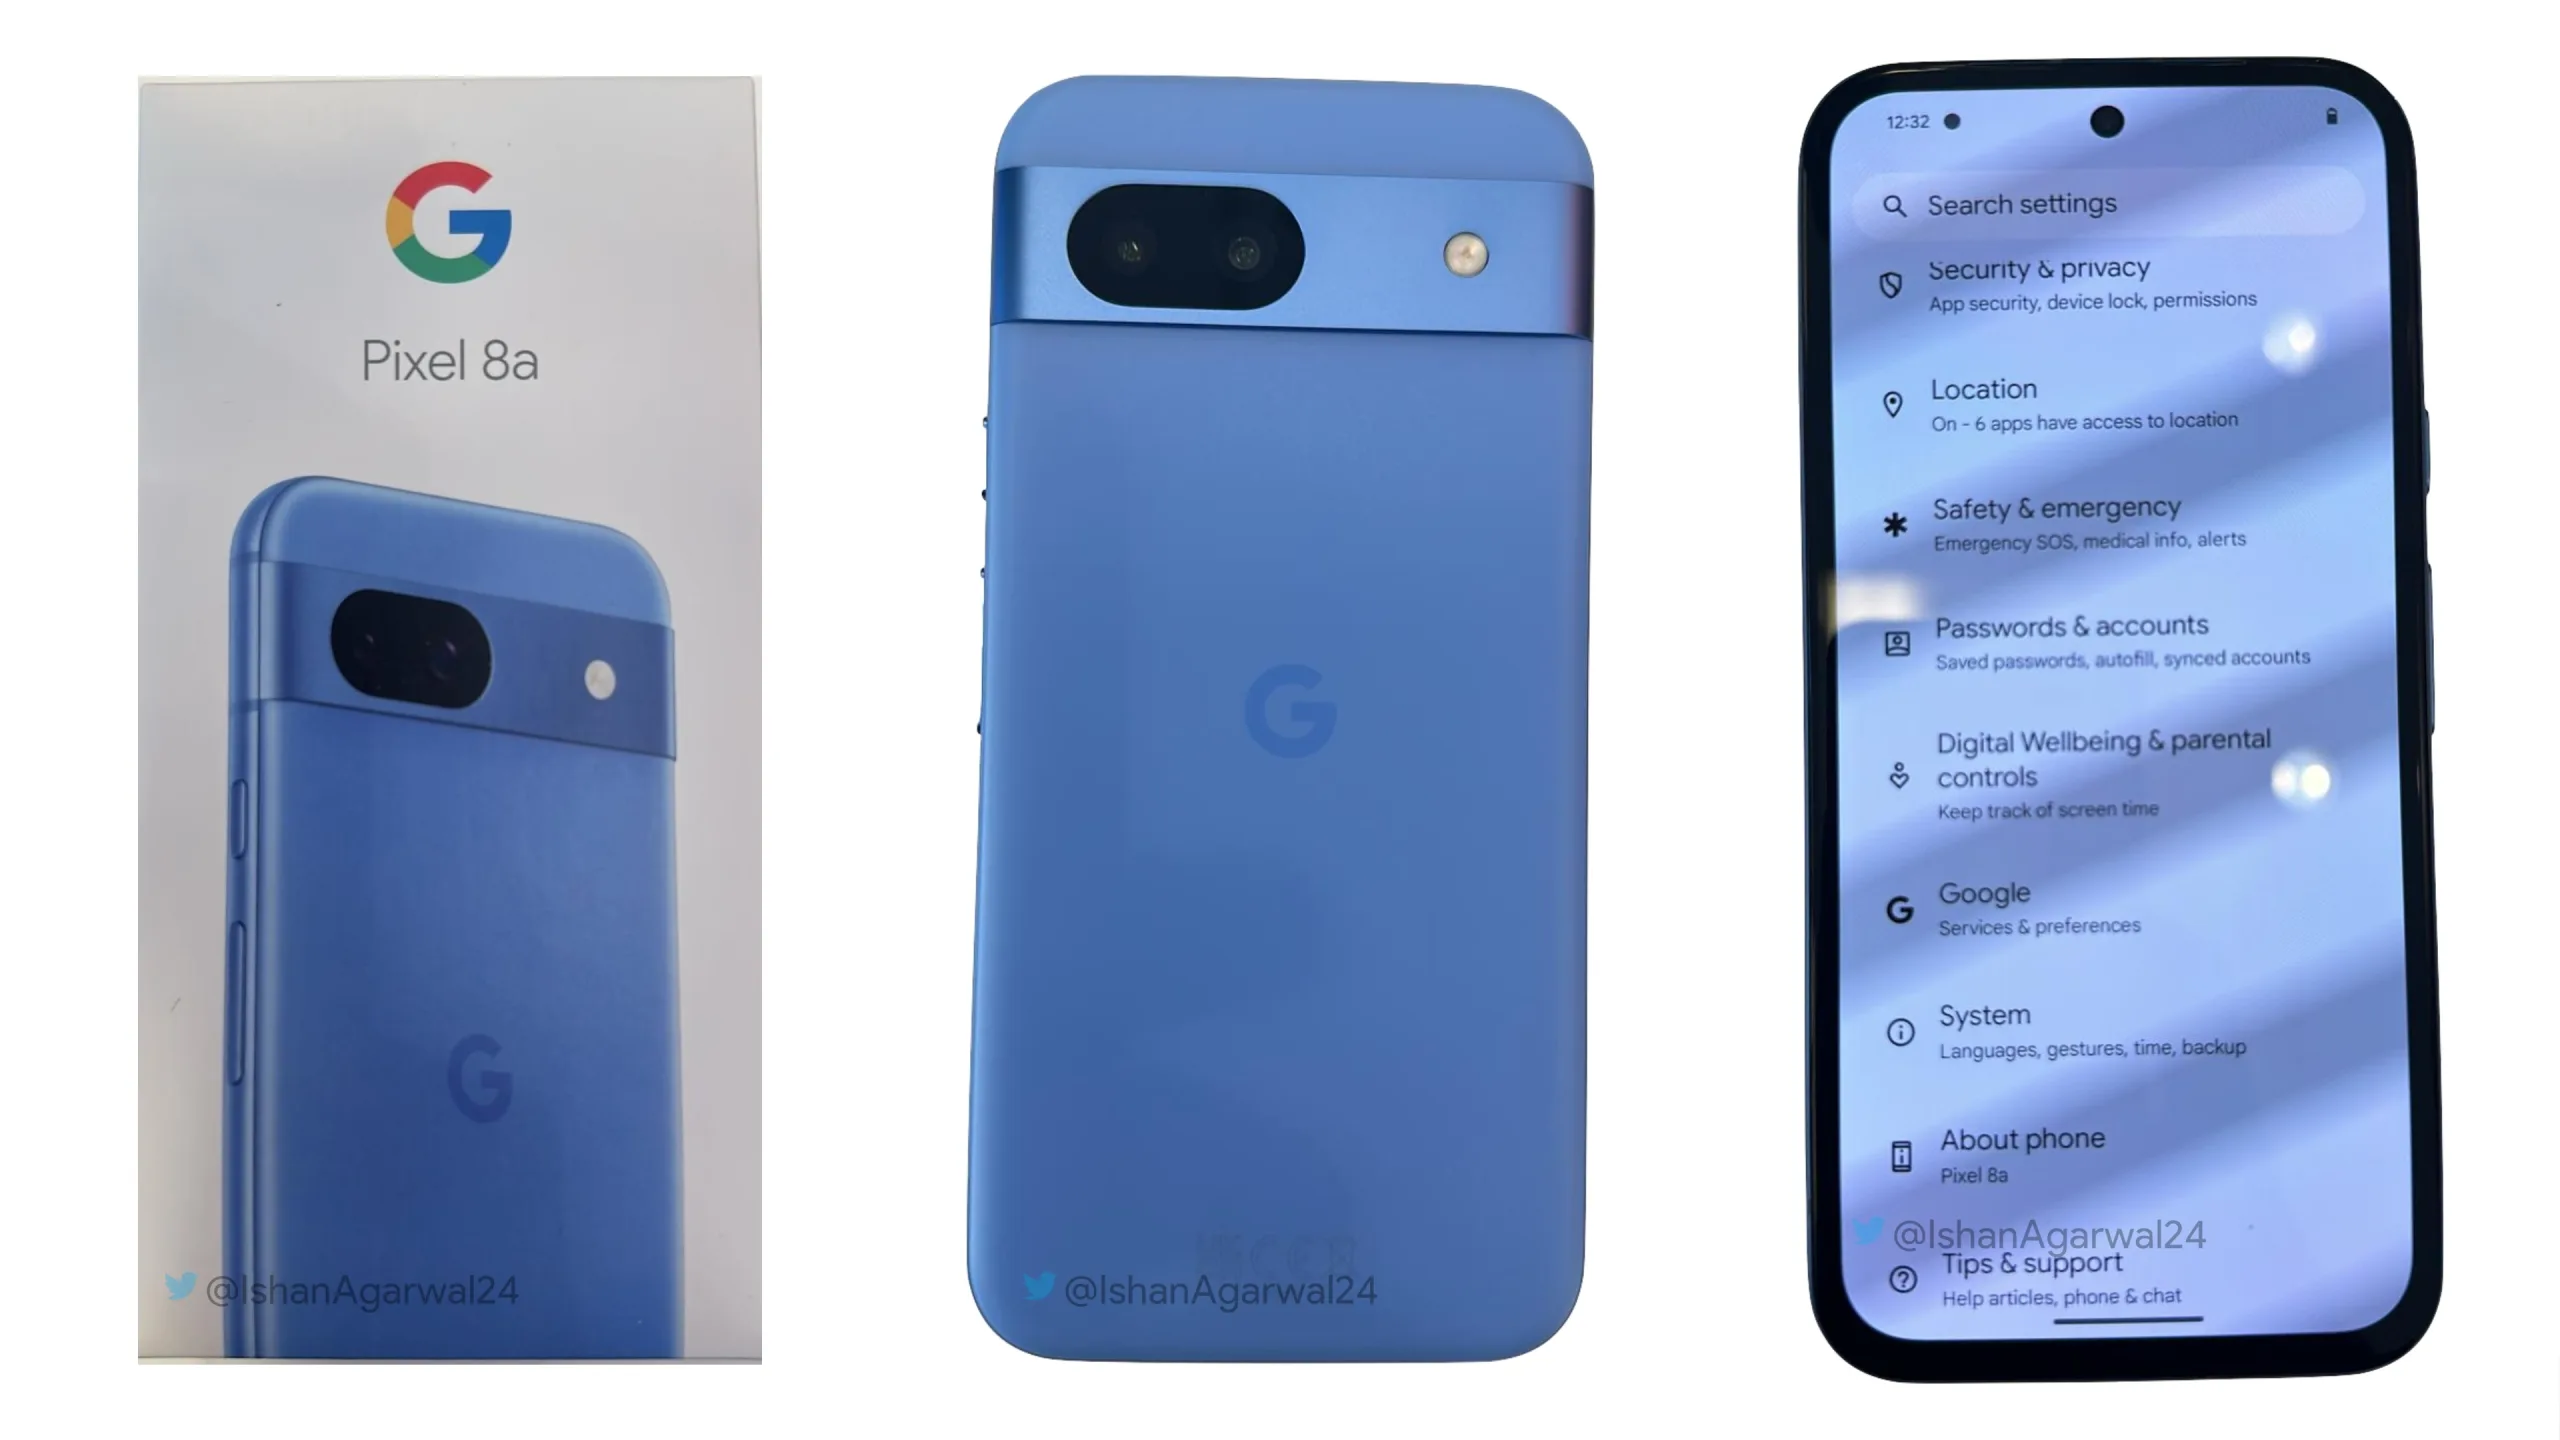 Pixel 8a live images and retail box